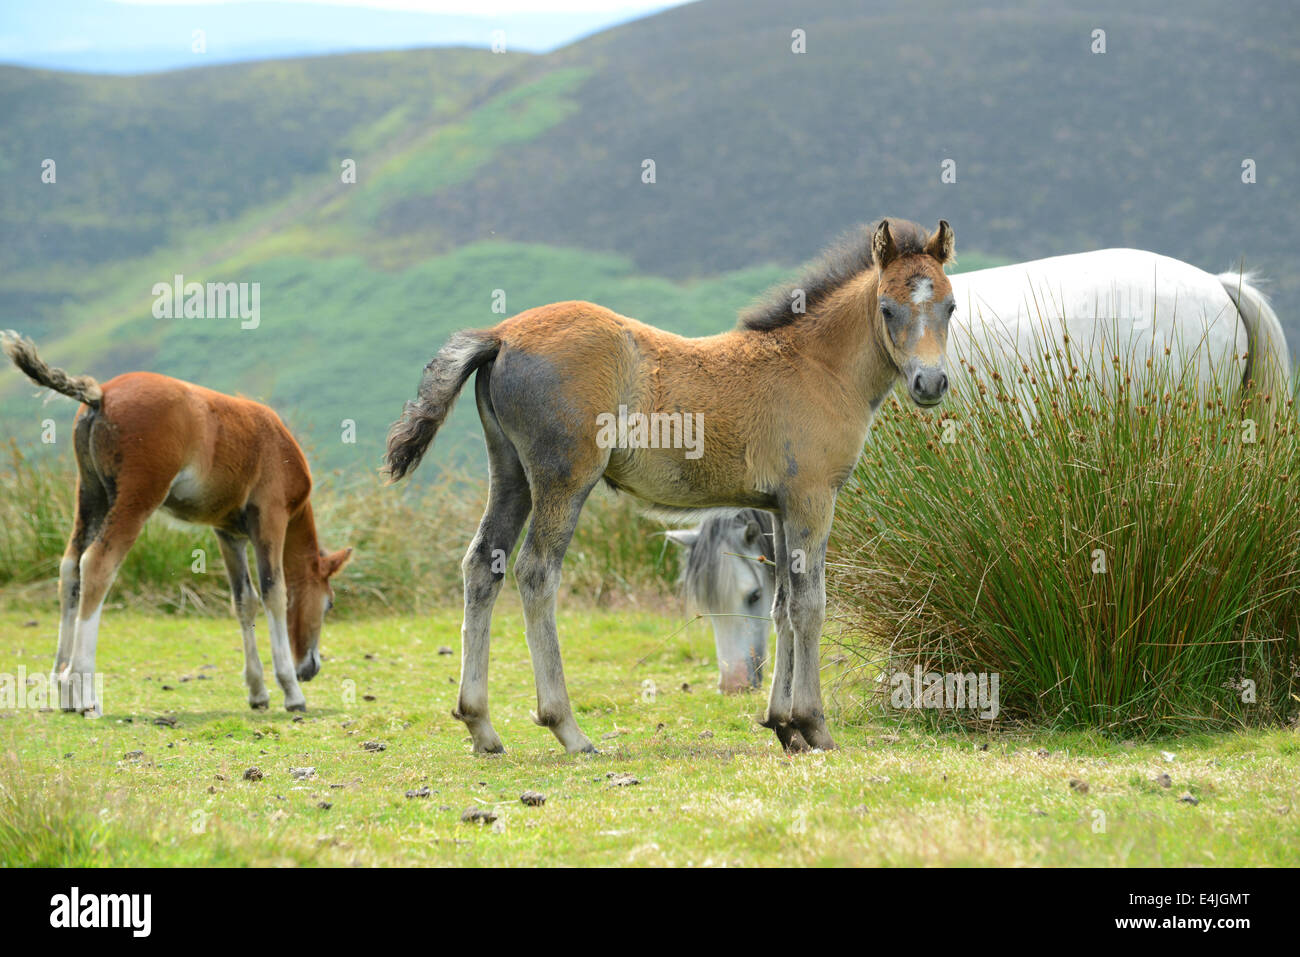 Long Mynd Shropshire Hills Uk 13th July 2014.  Born to be wild! Two week old wild pony foal stretching his legs on the hills of Shropshire. Credit:  David Bagnall/Alamy Live News Stock Photo